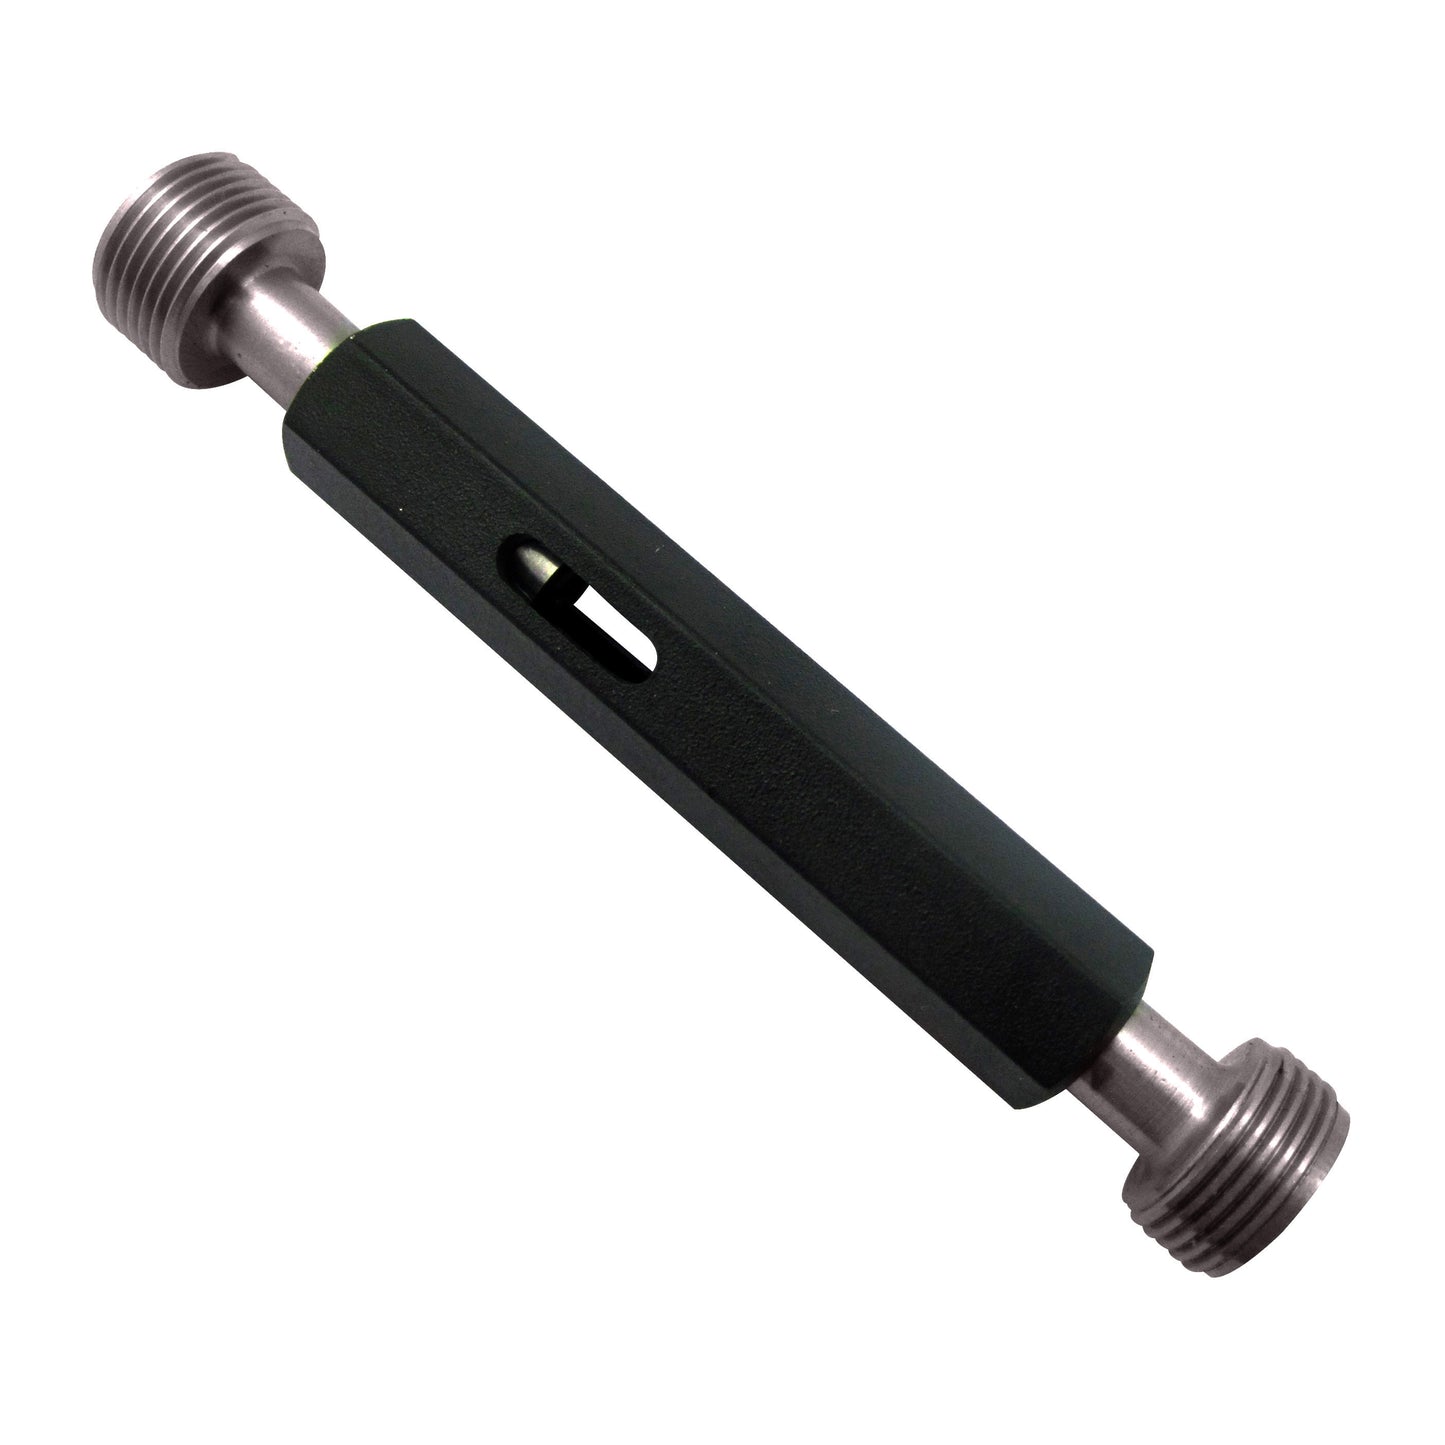 7/8" - 18 Unified Right Hand Thread Plug Gauge